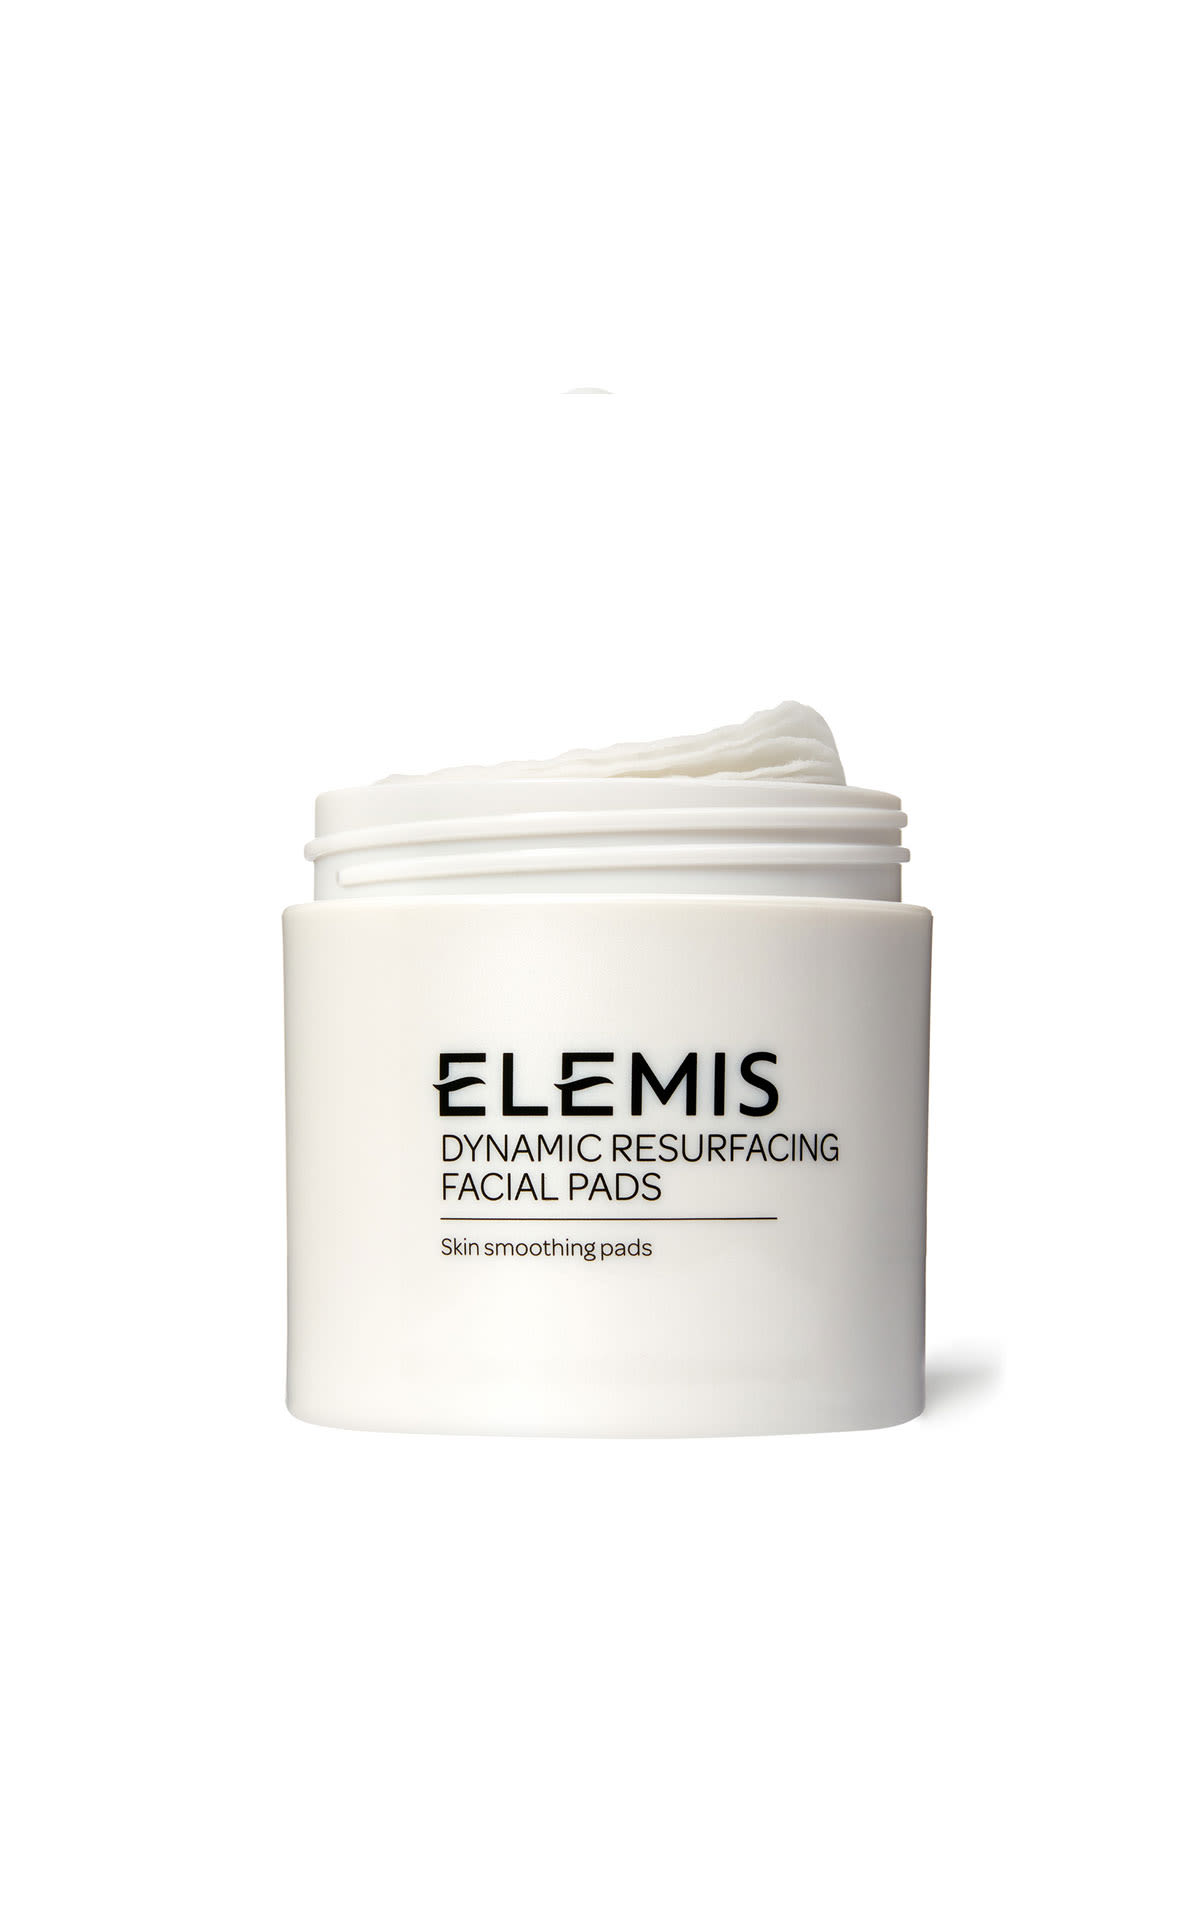 ELEMIS Dynamic resurfacing facial pads from Bicester Village